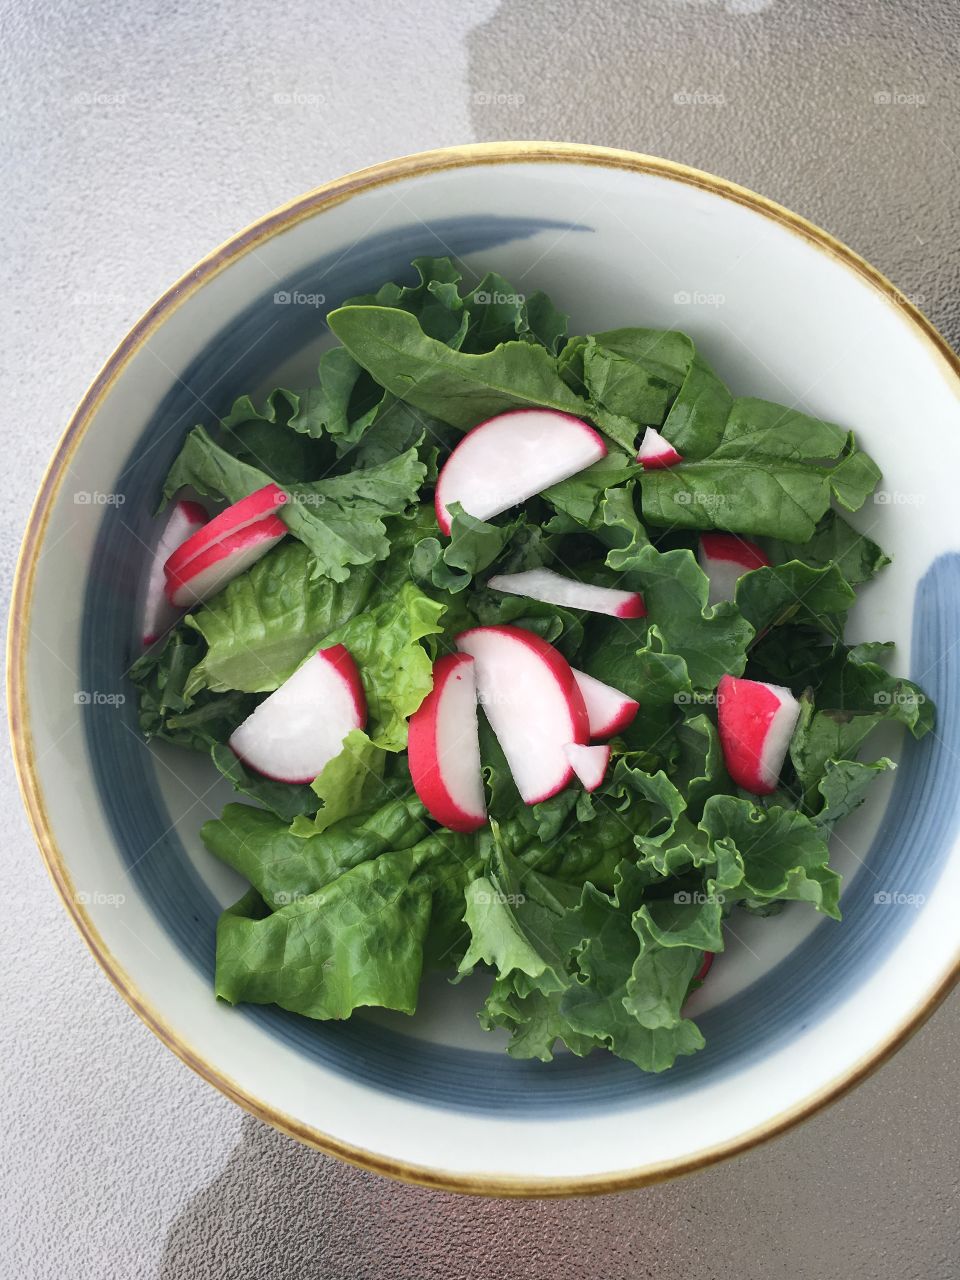 Bowl of fresh picked lettuce greens and radishes in salad.